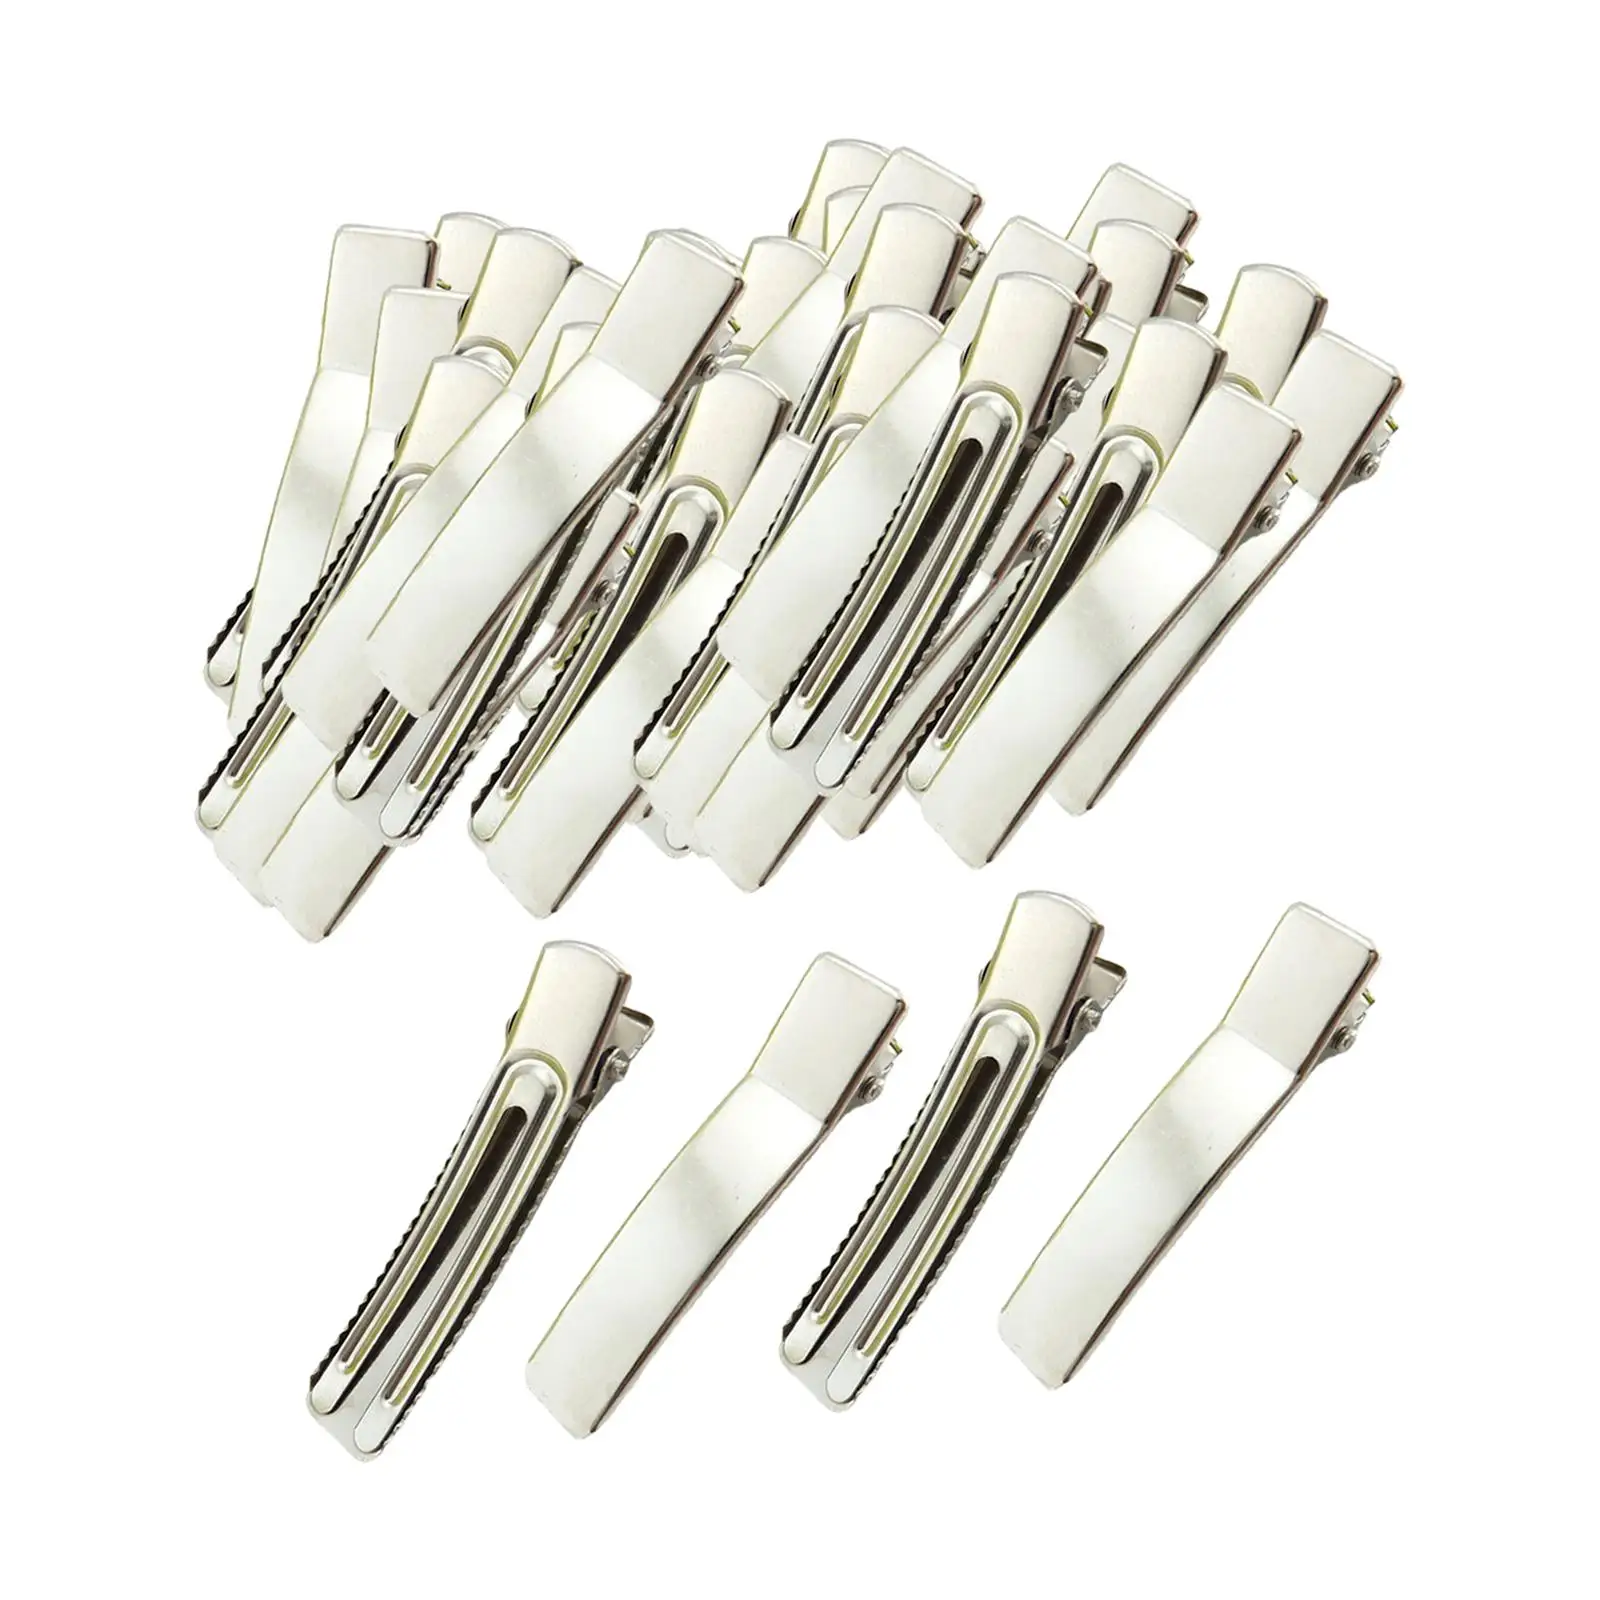 50 Pieces Alligator Hair Clips Double Prong Clips Hair Bow Clips Hairclips for Hair Styling Accessories or DIY Projects Salon